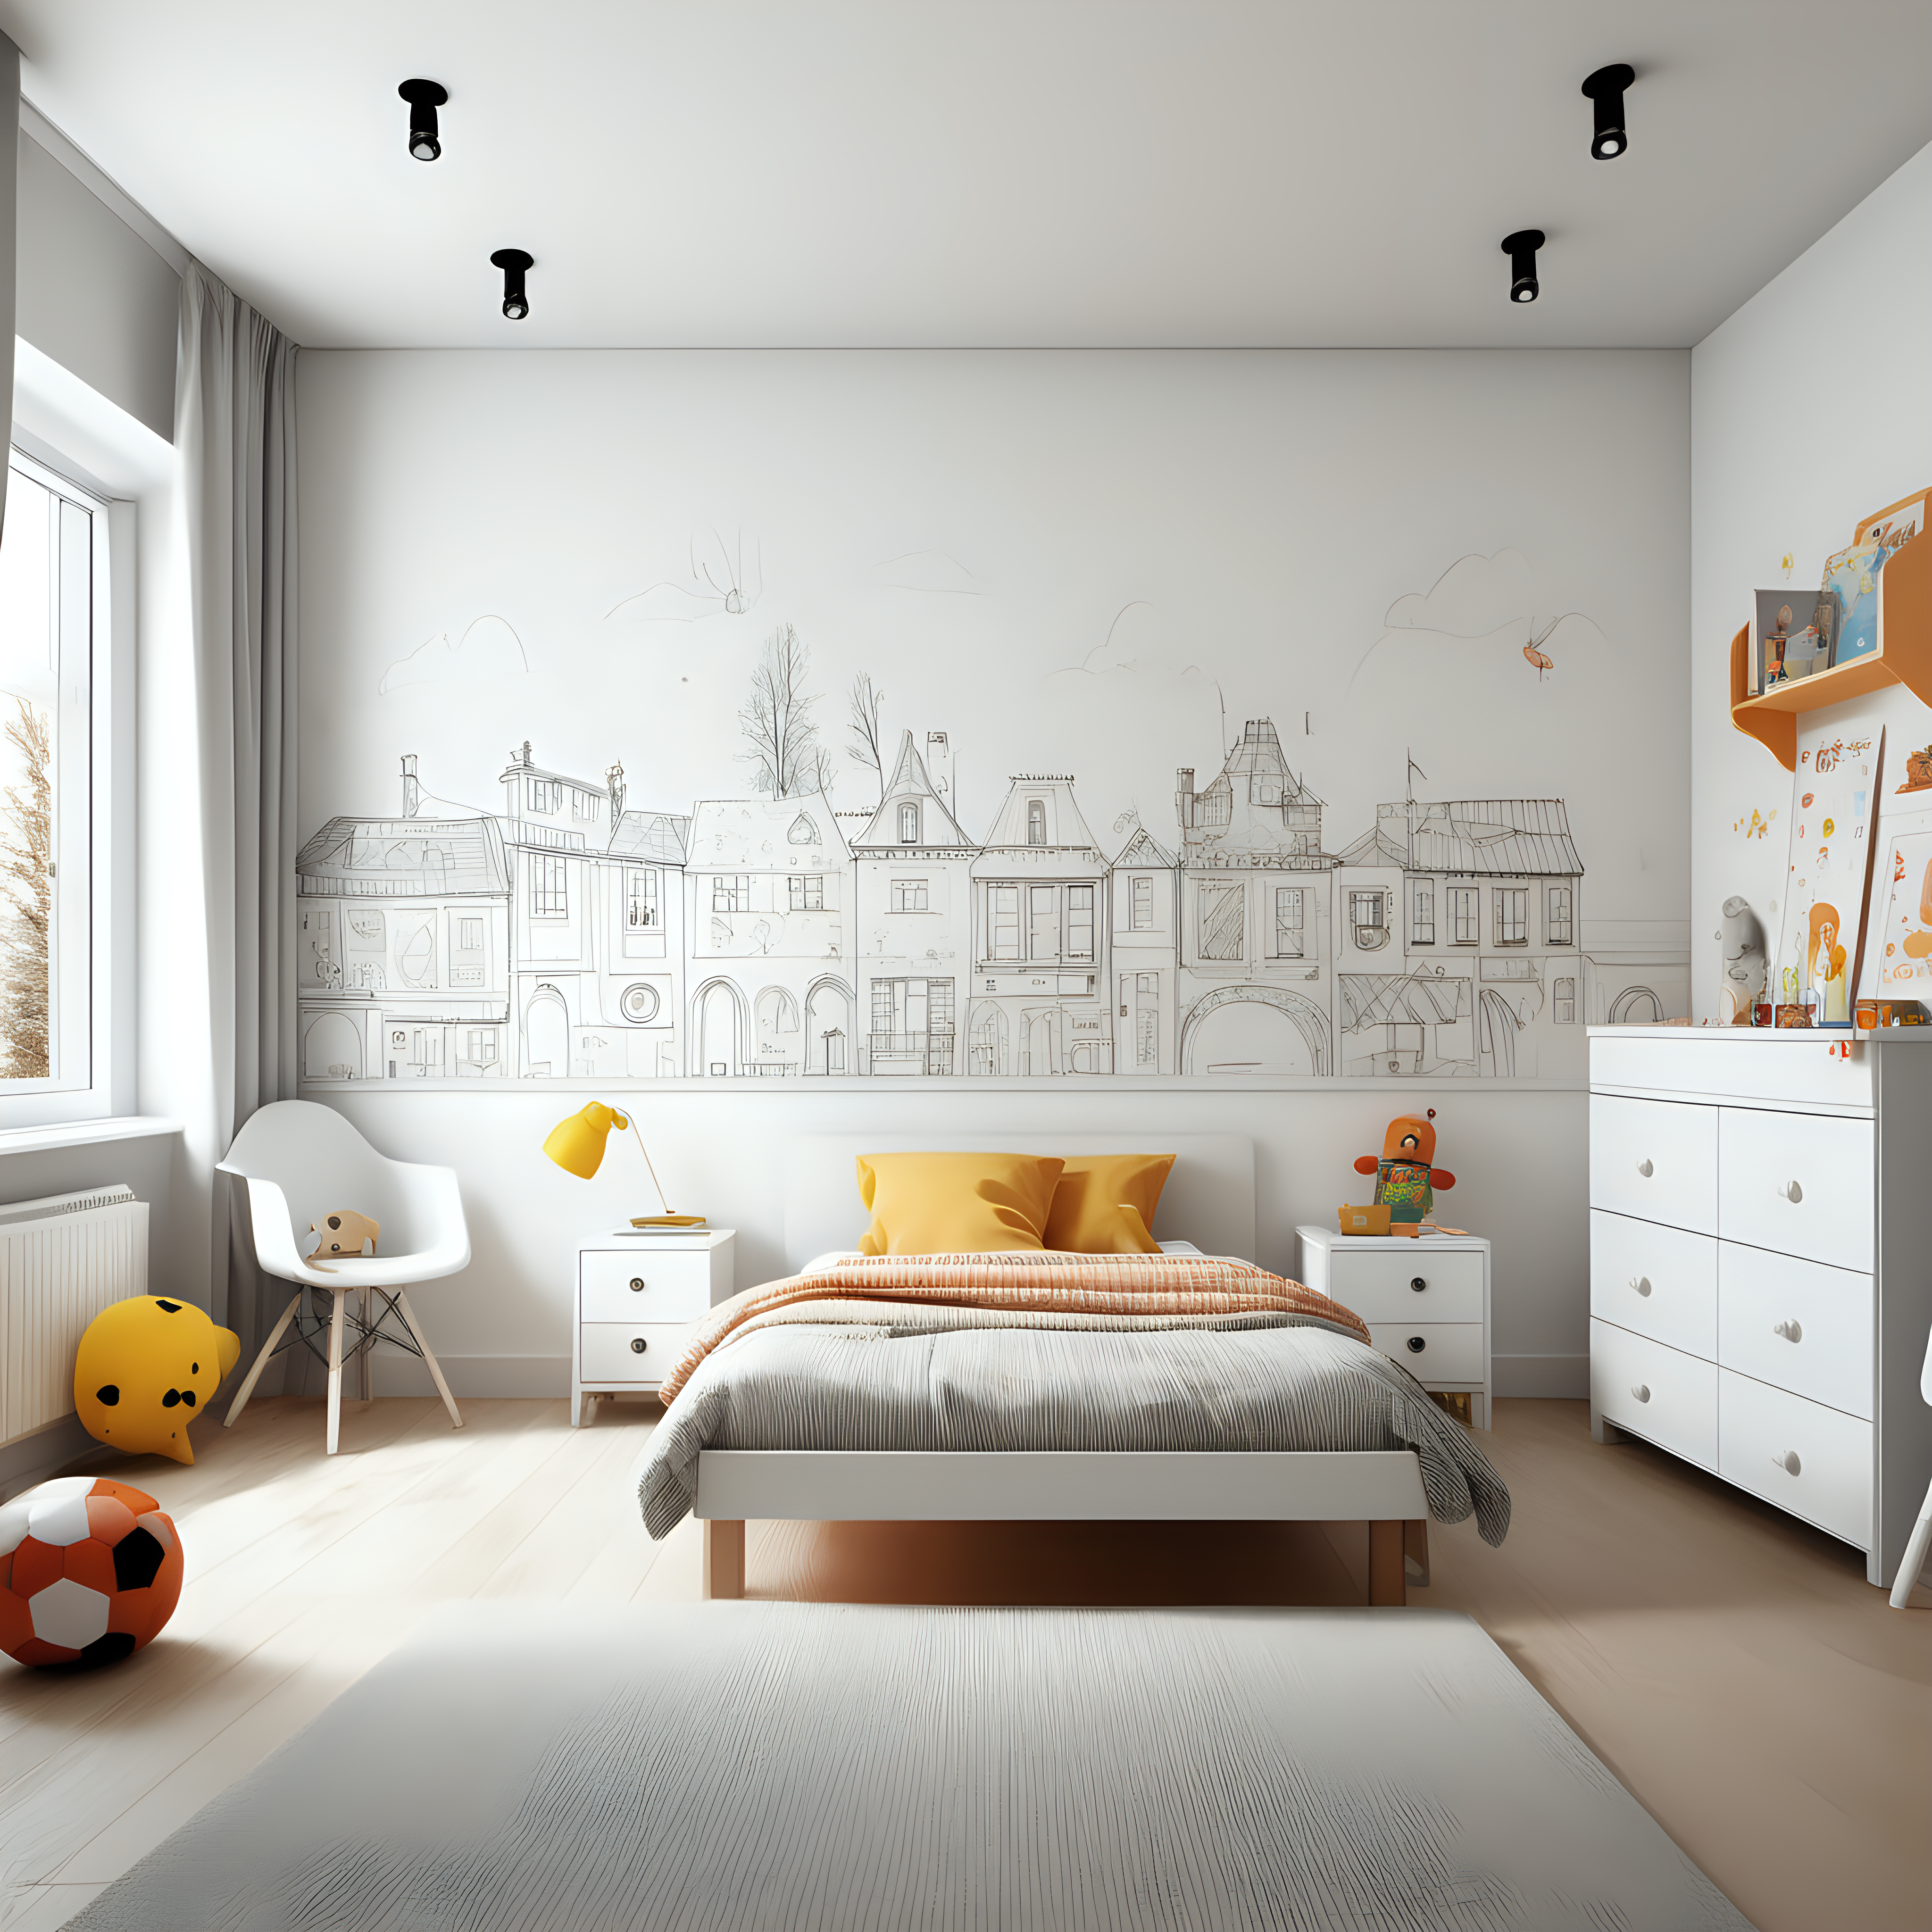 Create a realistic illustrationdesign of a childrens room